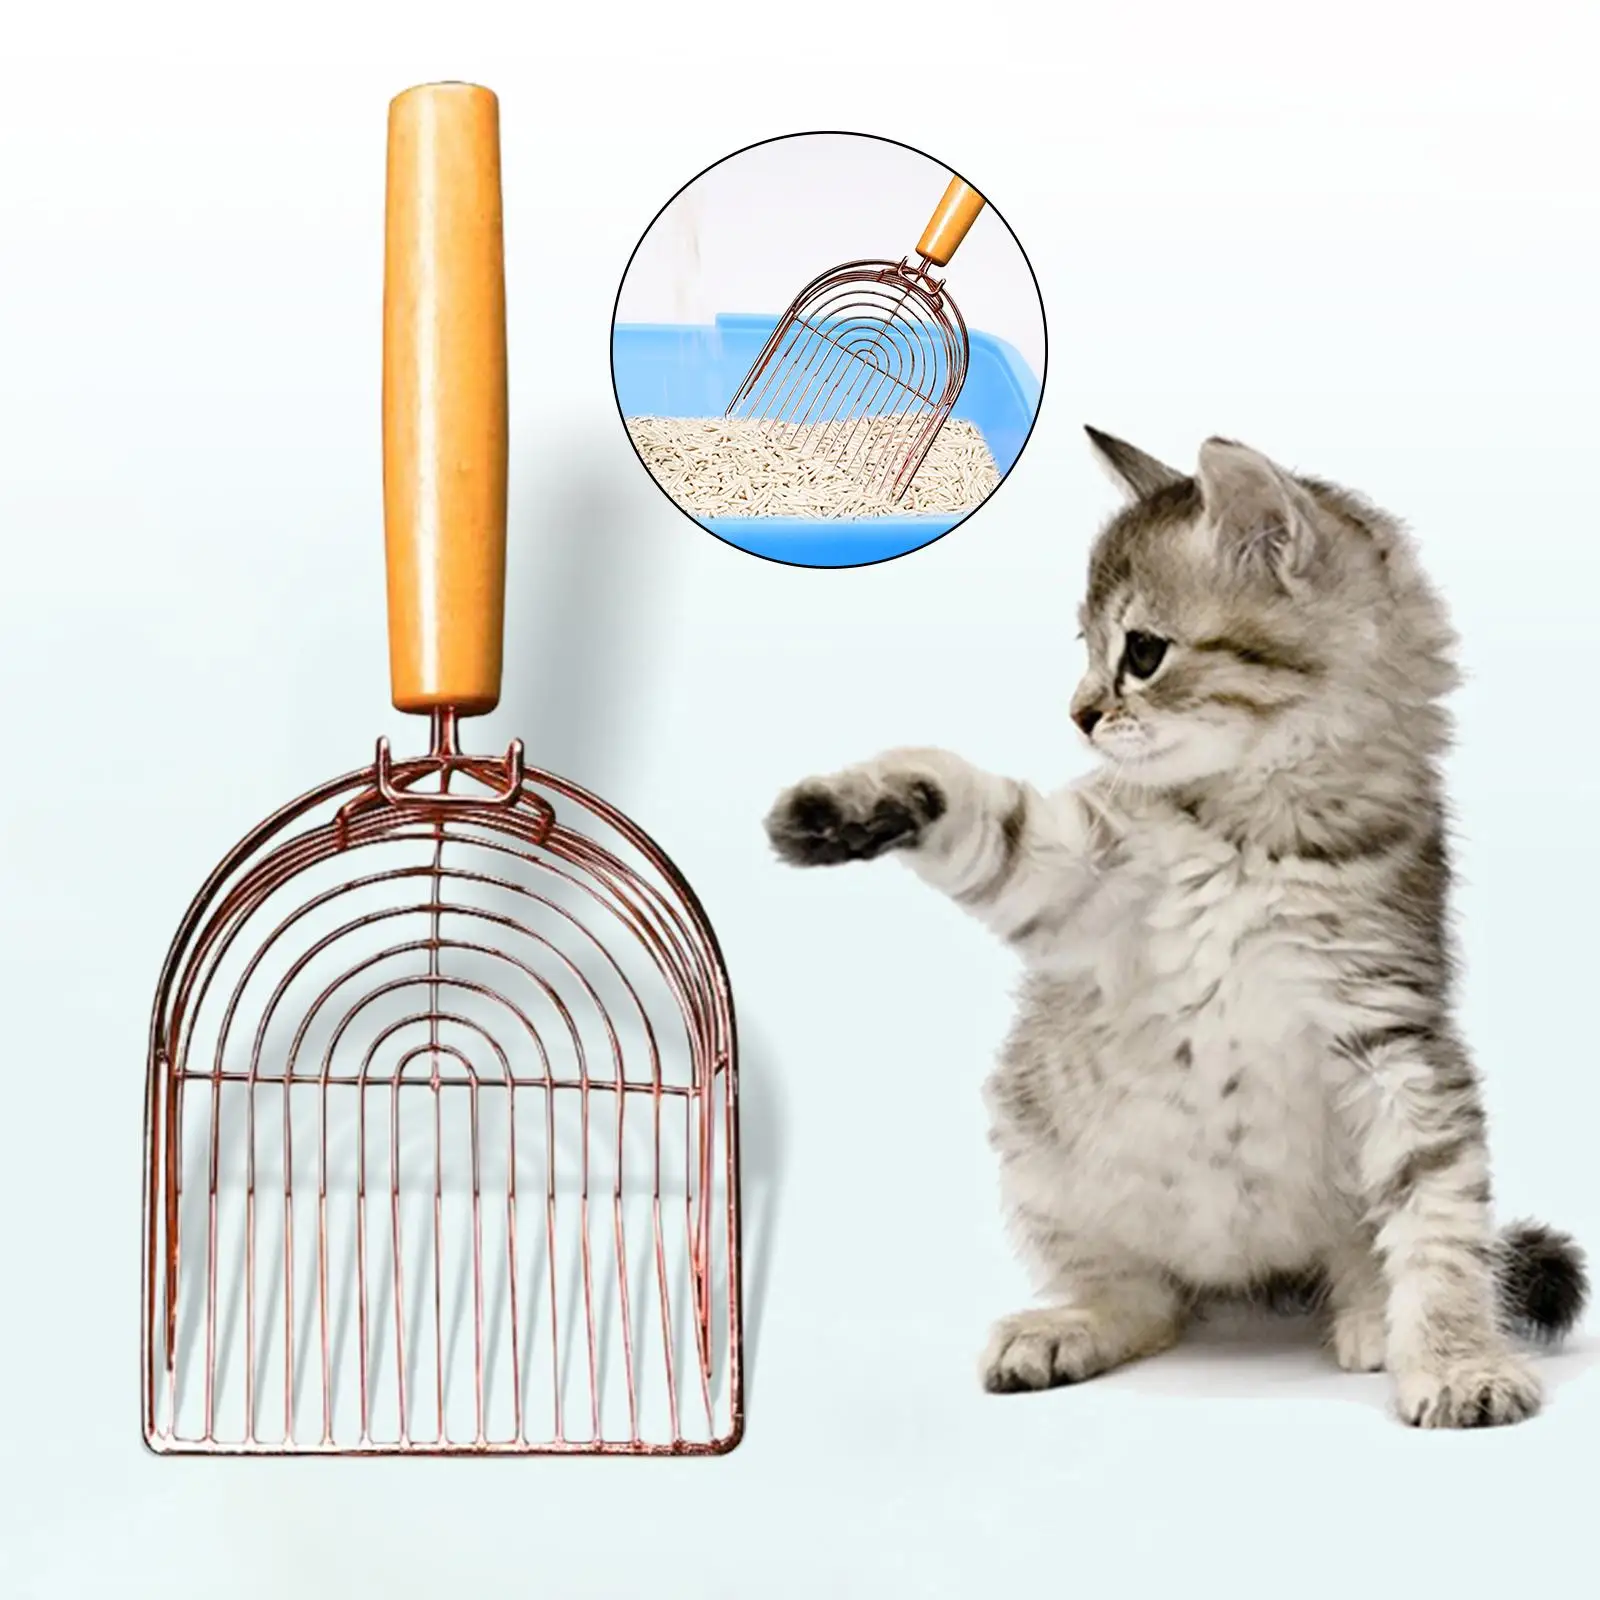 Cat Litter Scooper, Cat Accessories Cat Scooper Stainless Steel Sifting Cleaning for Litter Box, Cat Sifter Pet Supplies